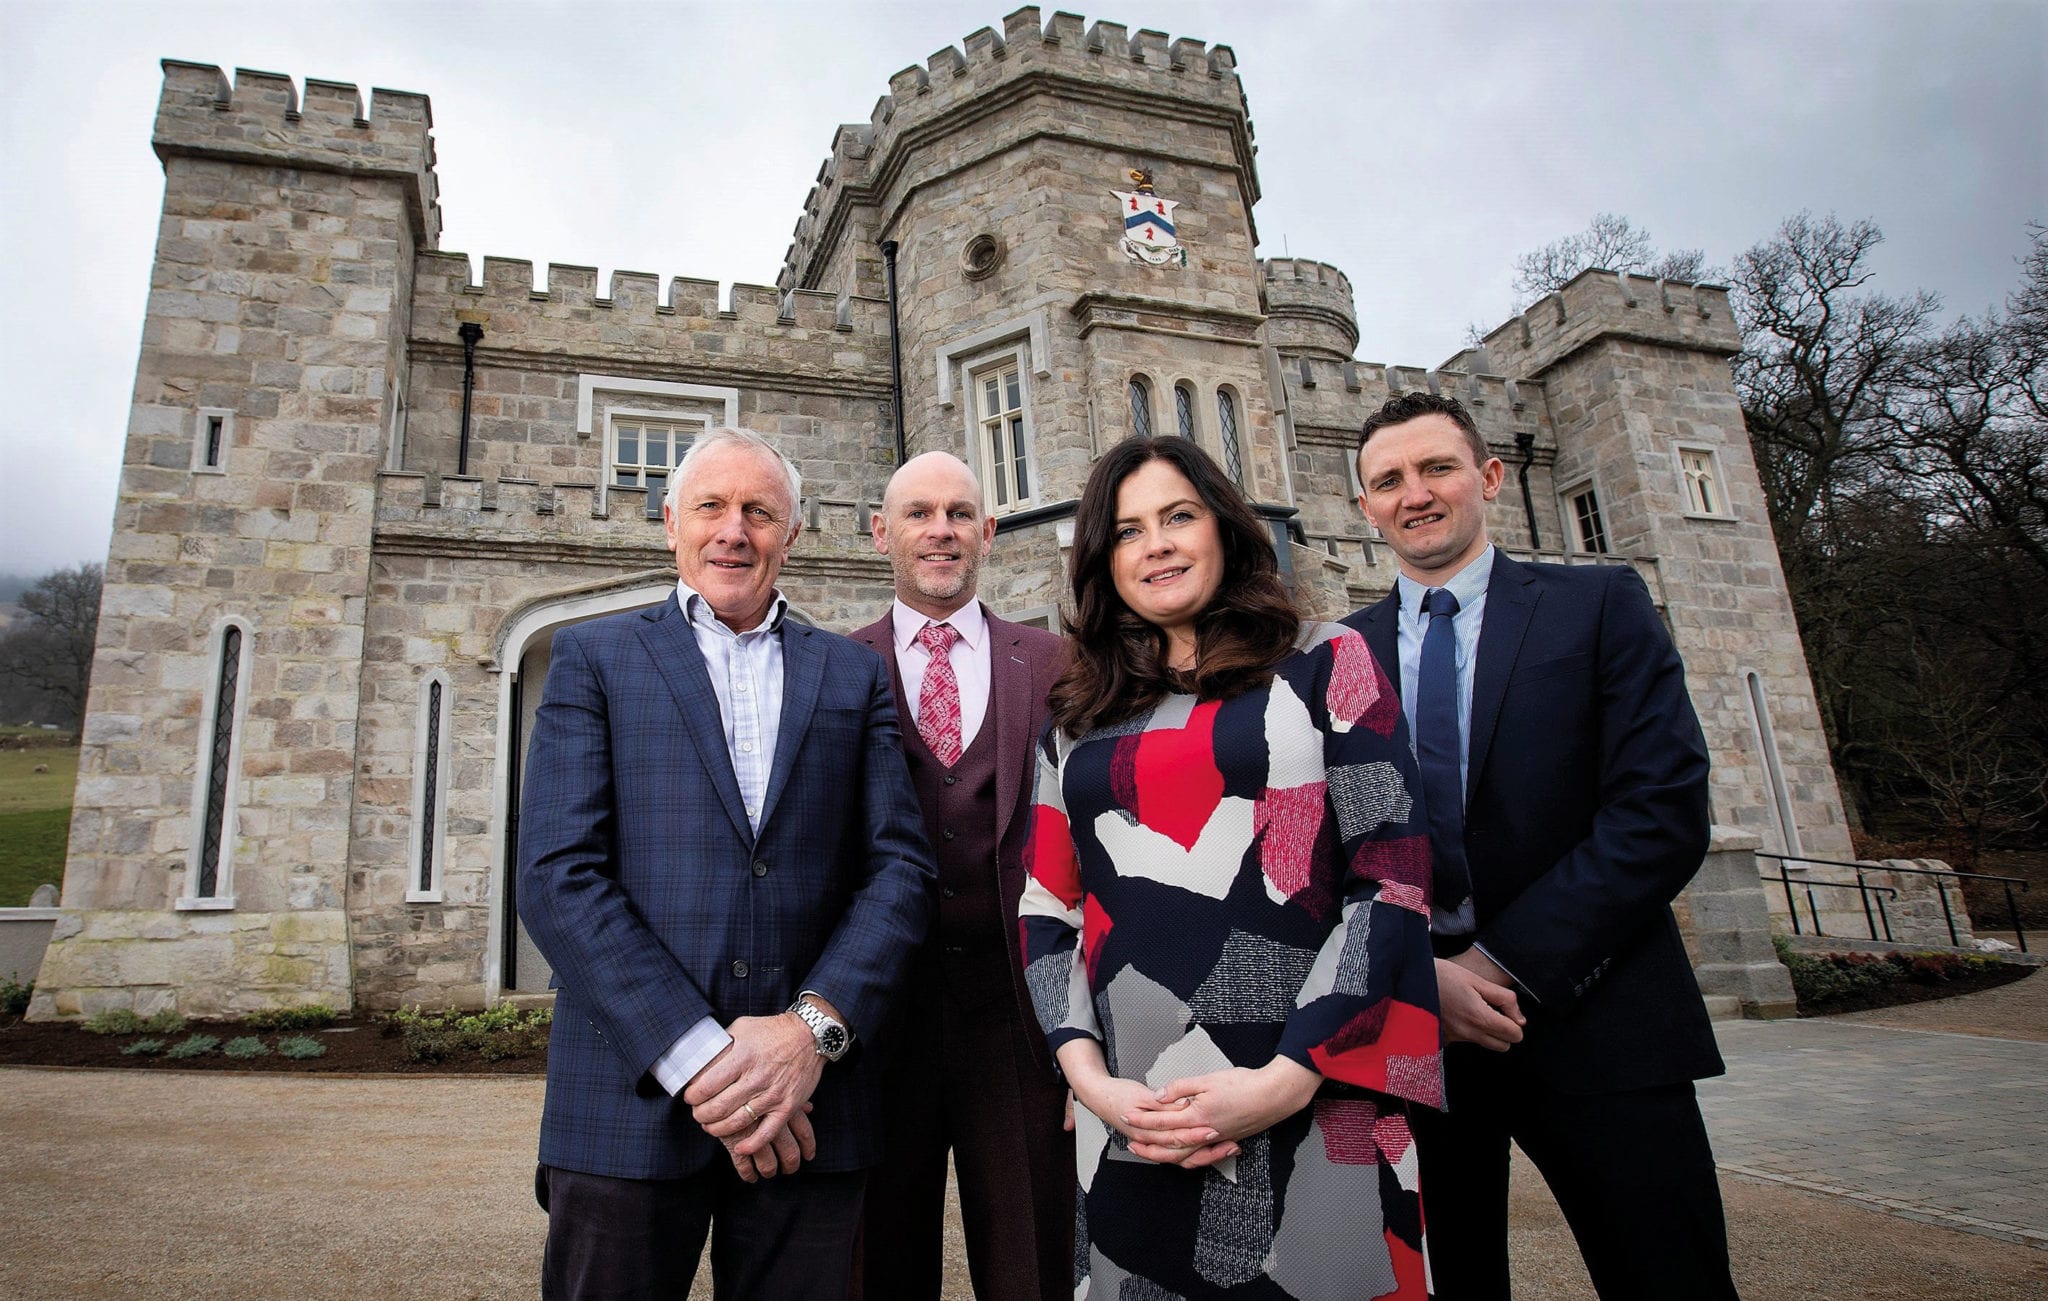 Pictured outside the newly renovated Killeavy Castle are owner, Mick Boyle; general manager, Jason Foody; Clare Clarke, relationship manager at First Trust Bank, which supported the project and Gary Flynn, business acquisition manager at the bank.